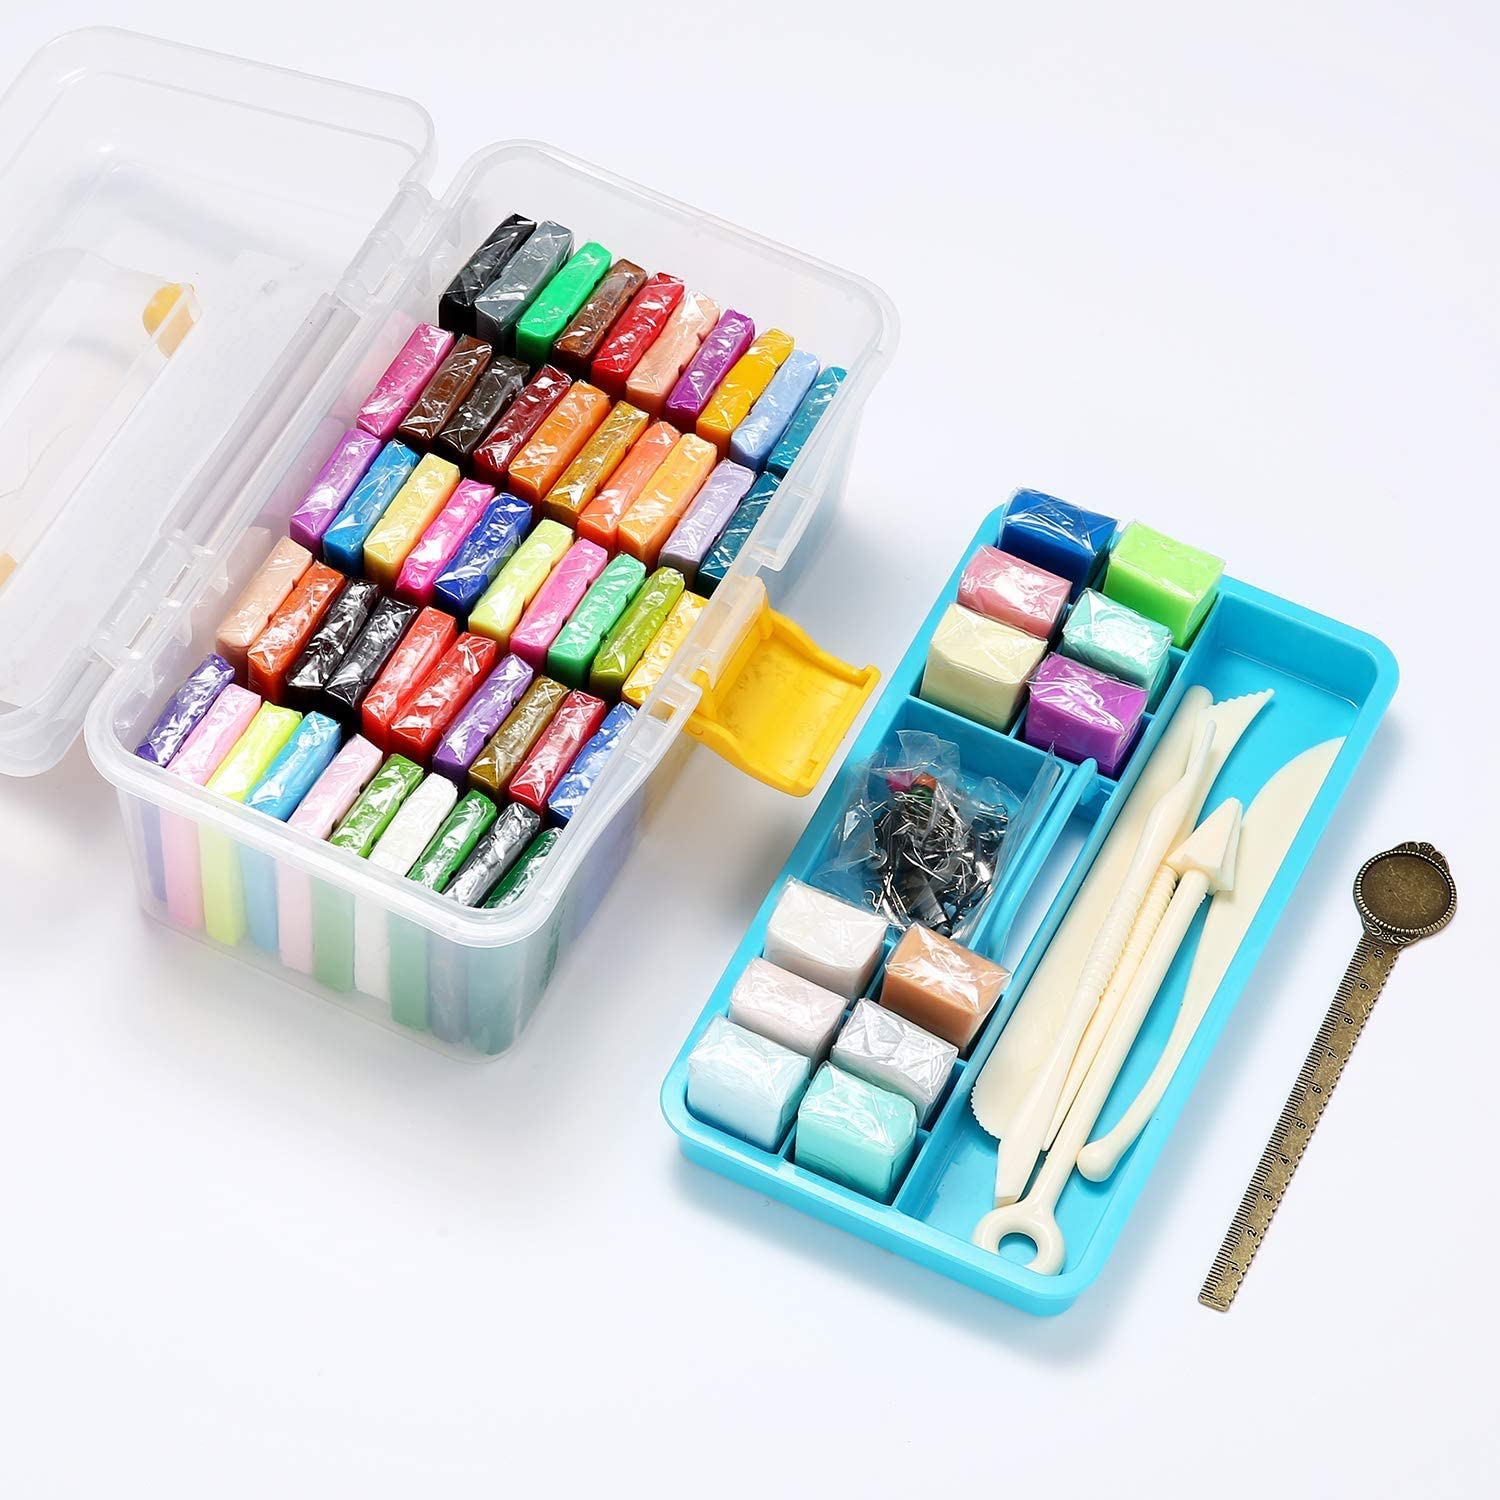 Polymer Clay,32 Colors Oven Bake Model Clay DIY Air Dry Clay Soft Molding Craft  Clay Set with Modeling Tools and Accessories Best Gift for Kids